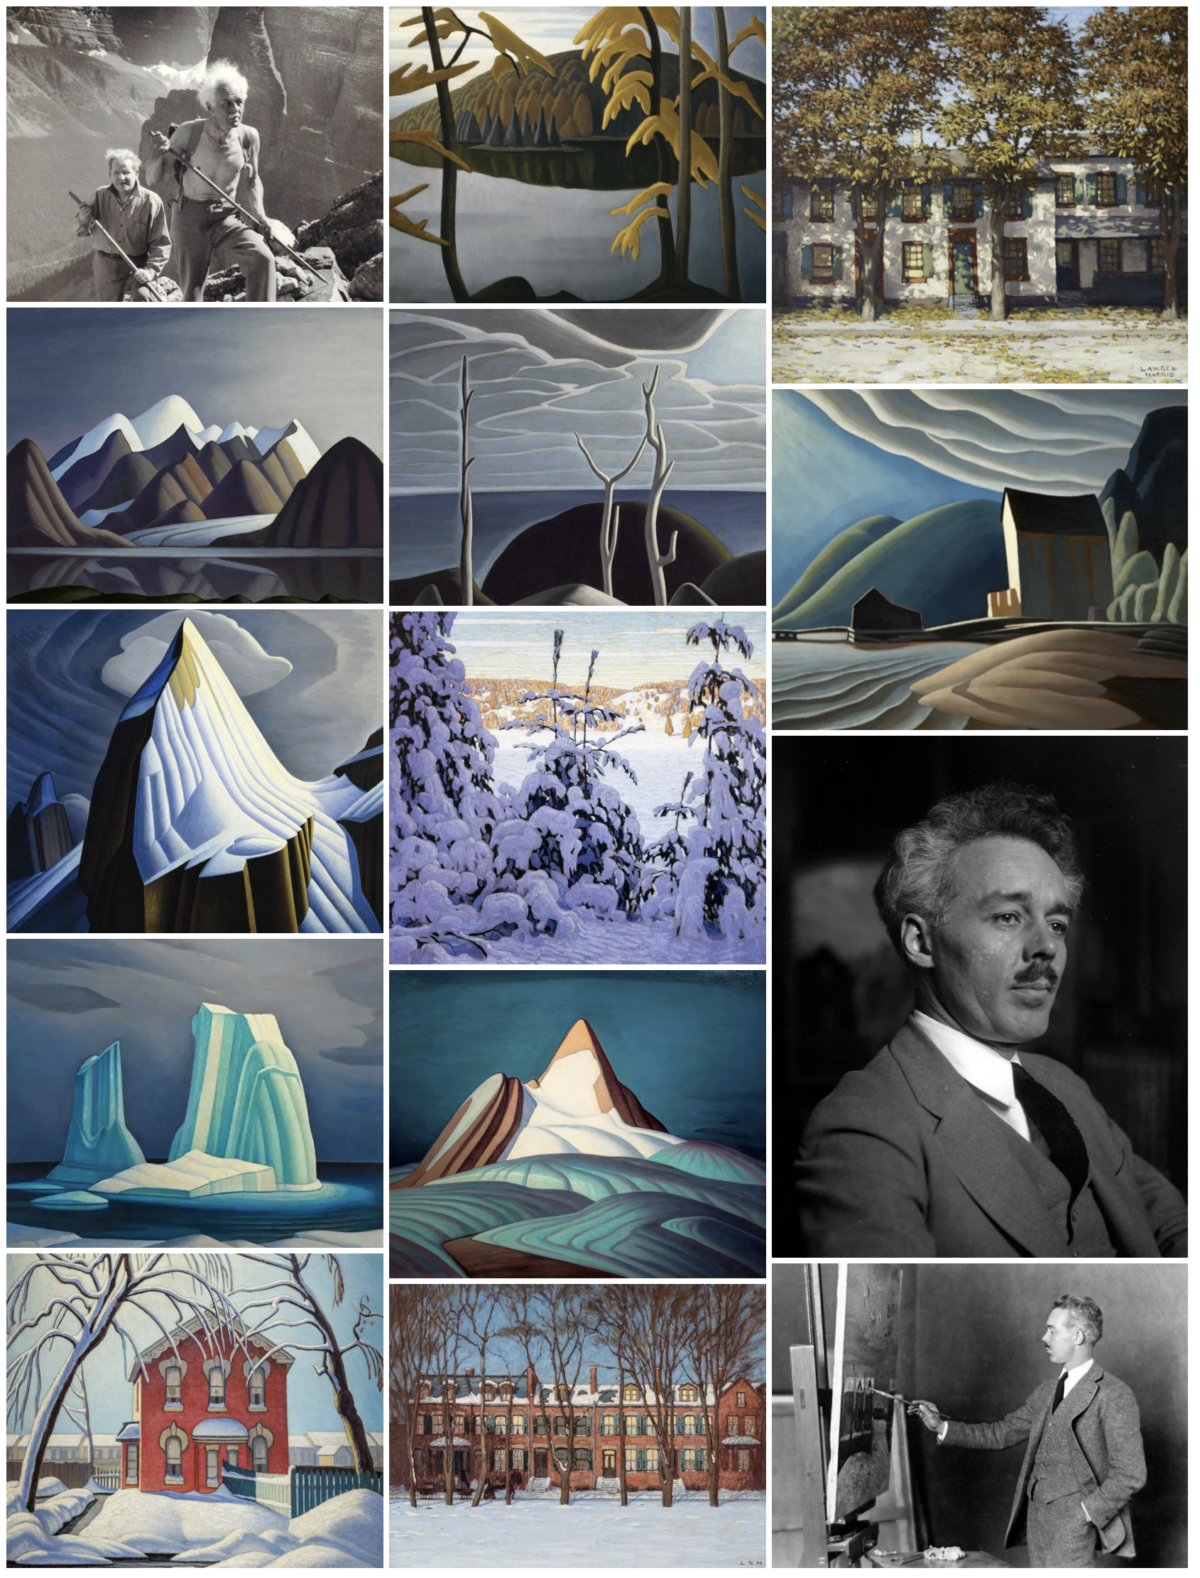 Lawren Stewart Harris - Canadian artist renowned for Canadian paintings and artwork